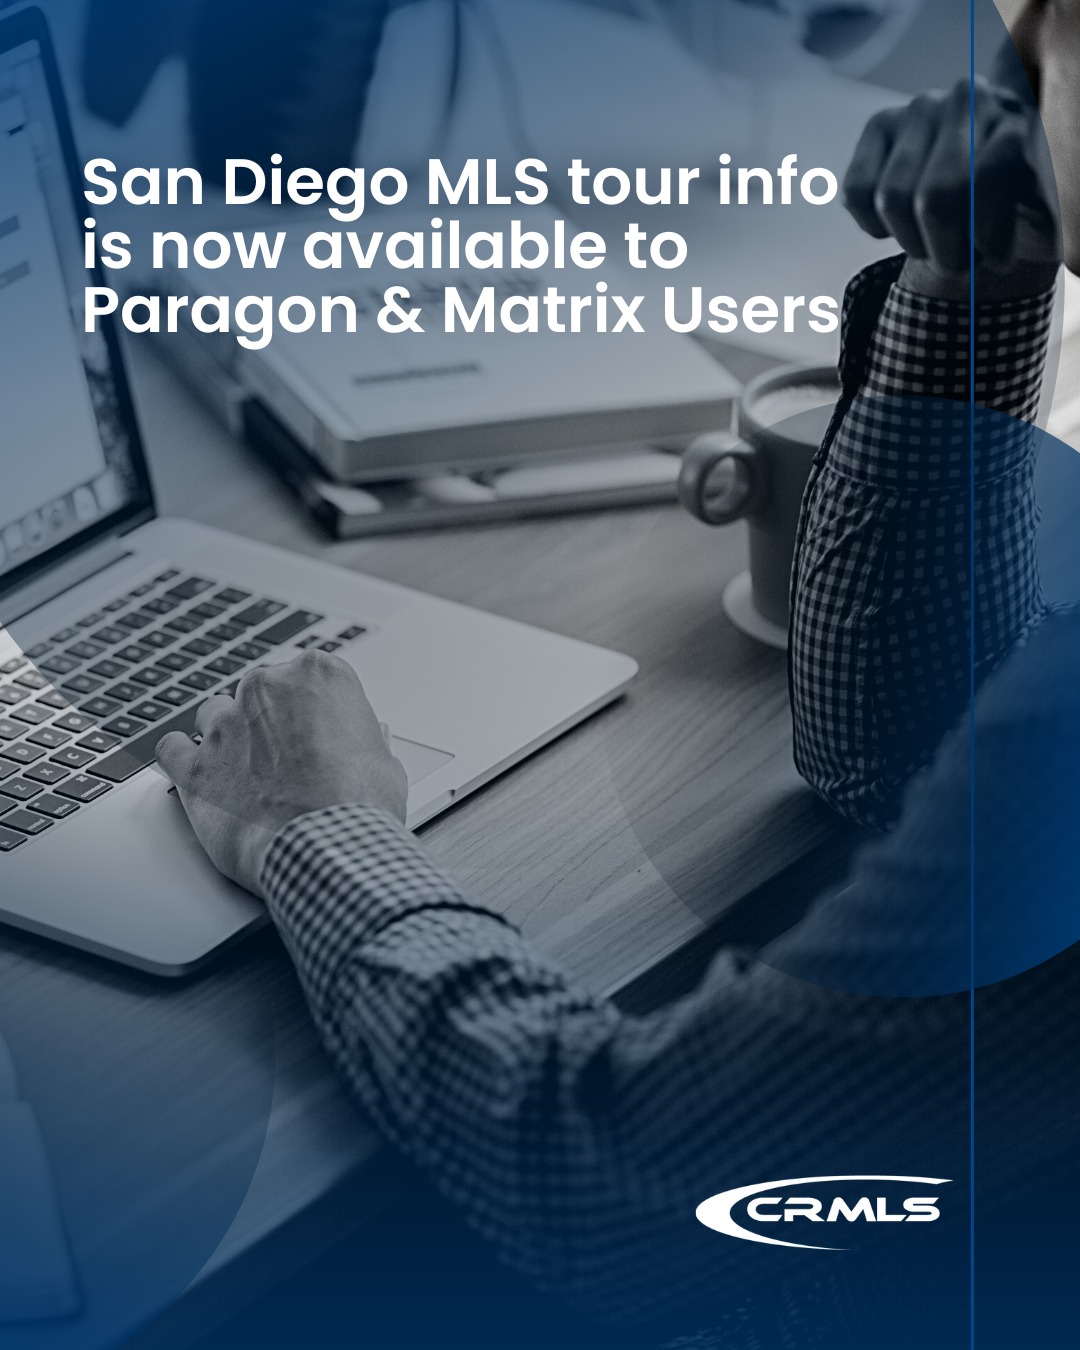 San Diego MLS tour info is now available to you